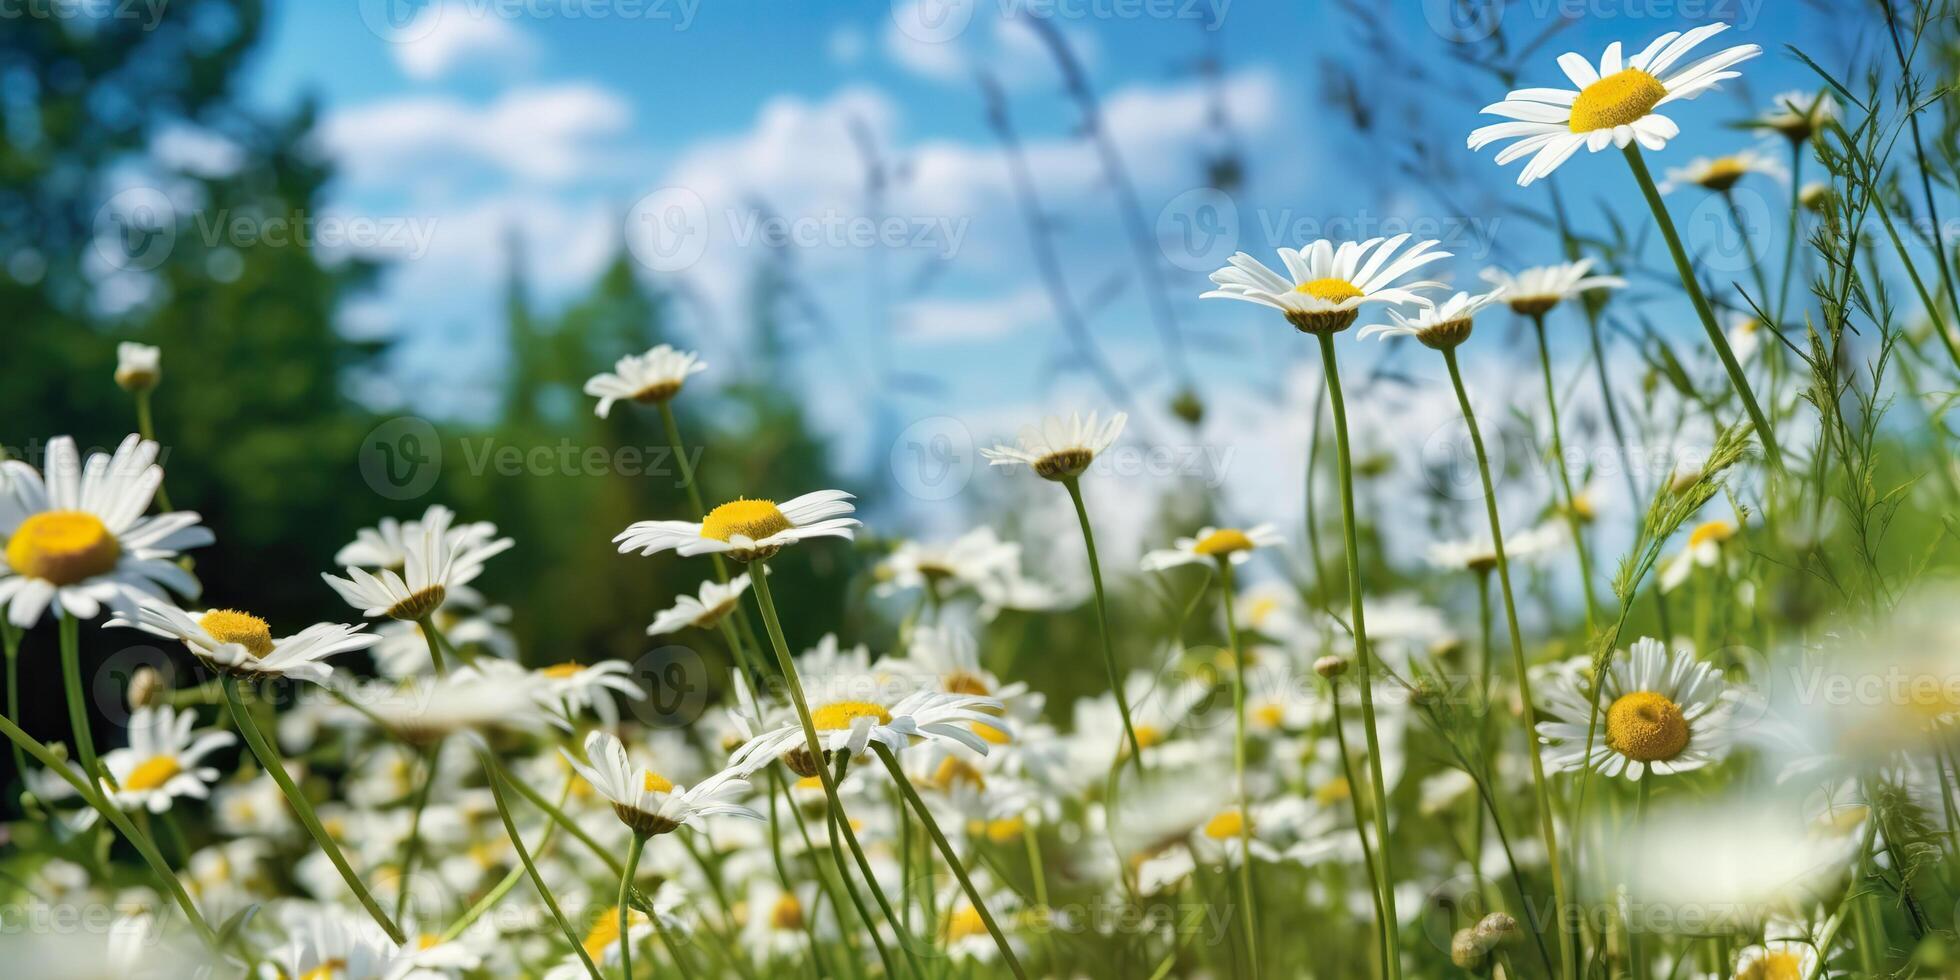 . . Wild daisies in the grass with a blue sky photo realistic illustration. Romantic